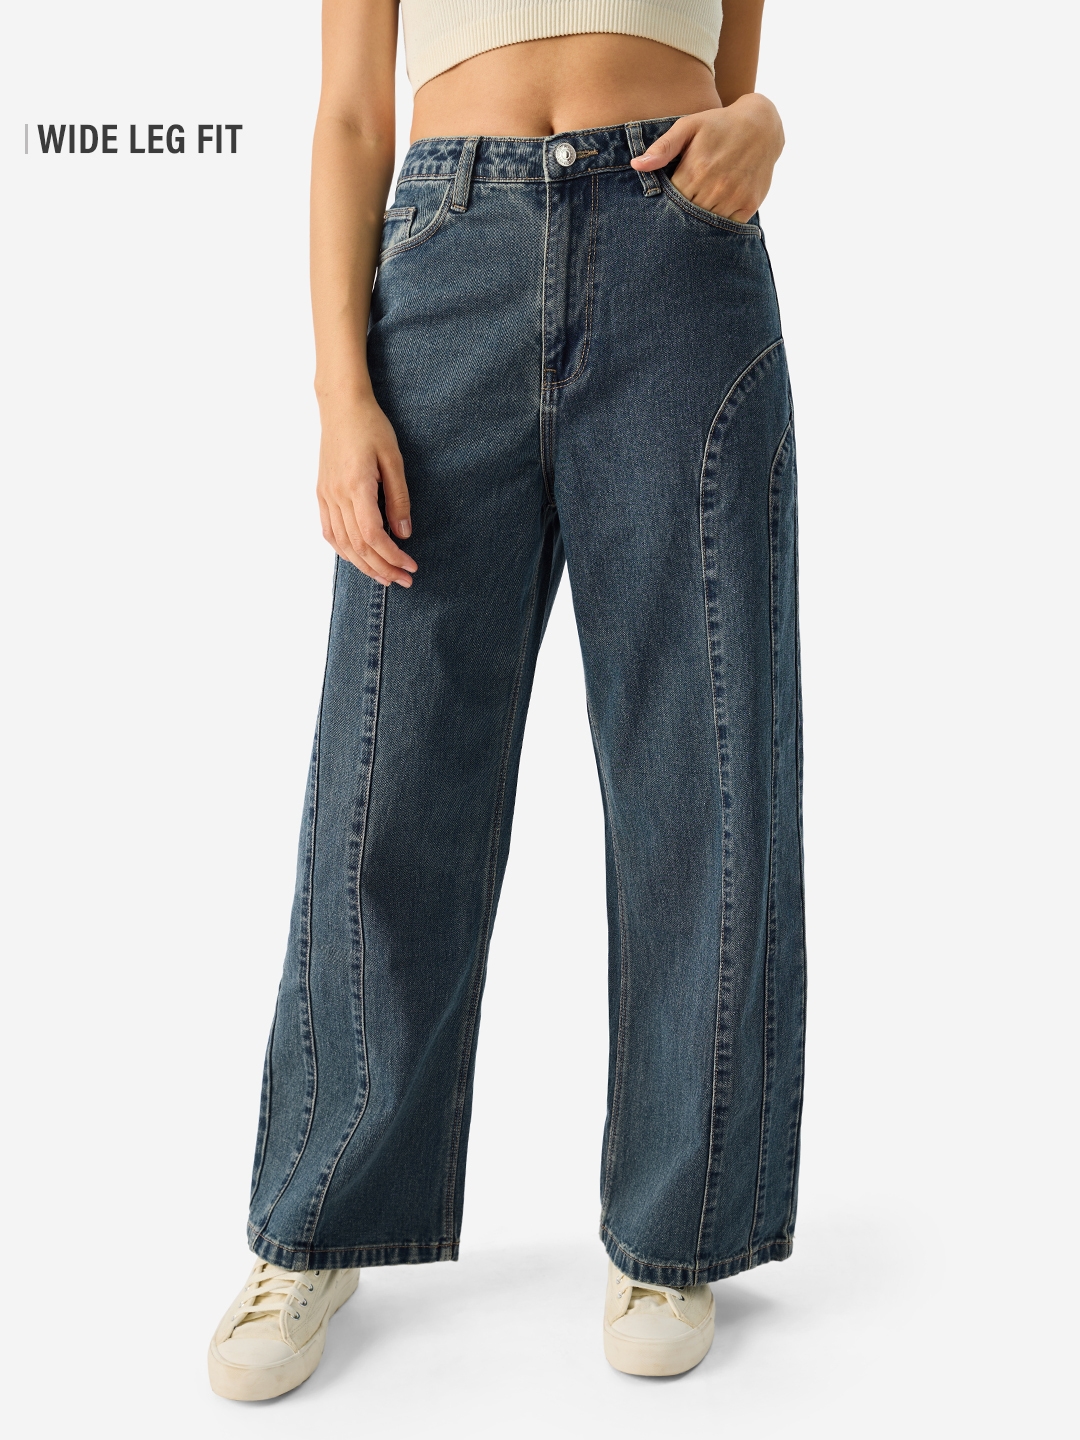 The Souled Store | Women's Solids Spruce Jeans